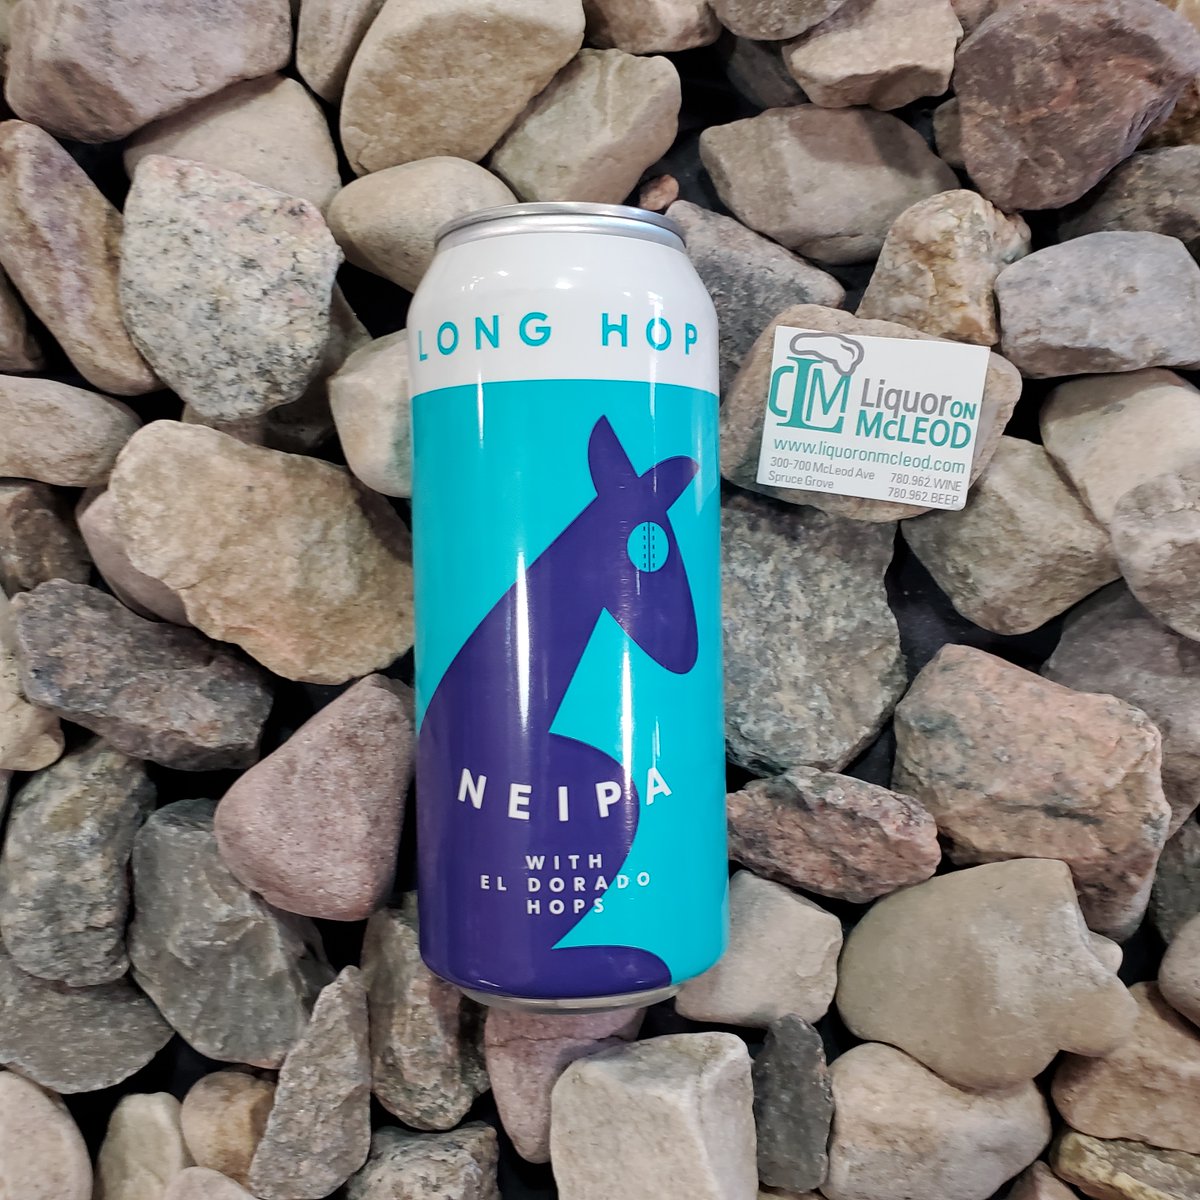 This is @LongHopBrewing third NEIPA this time with El Dorado. It is tropical, with notes of pineapple, and mango. #sprucegrove #stonyplain #albertabeer #abcraftbeer #yycbeer #liquoronmcleod #craftbeer